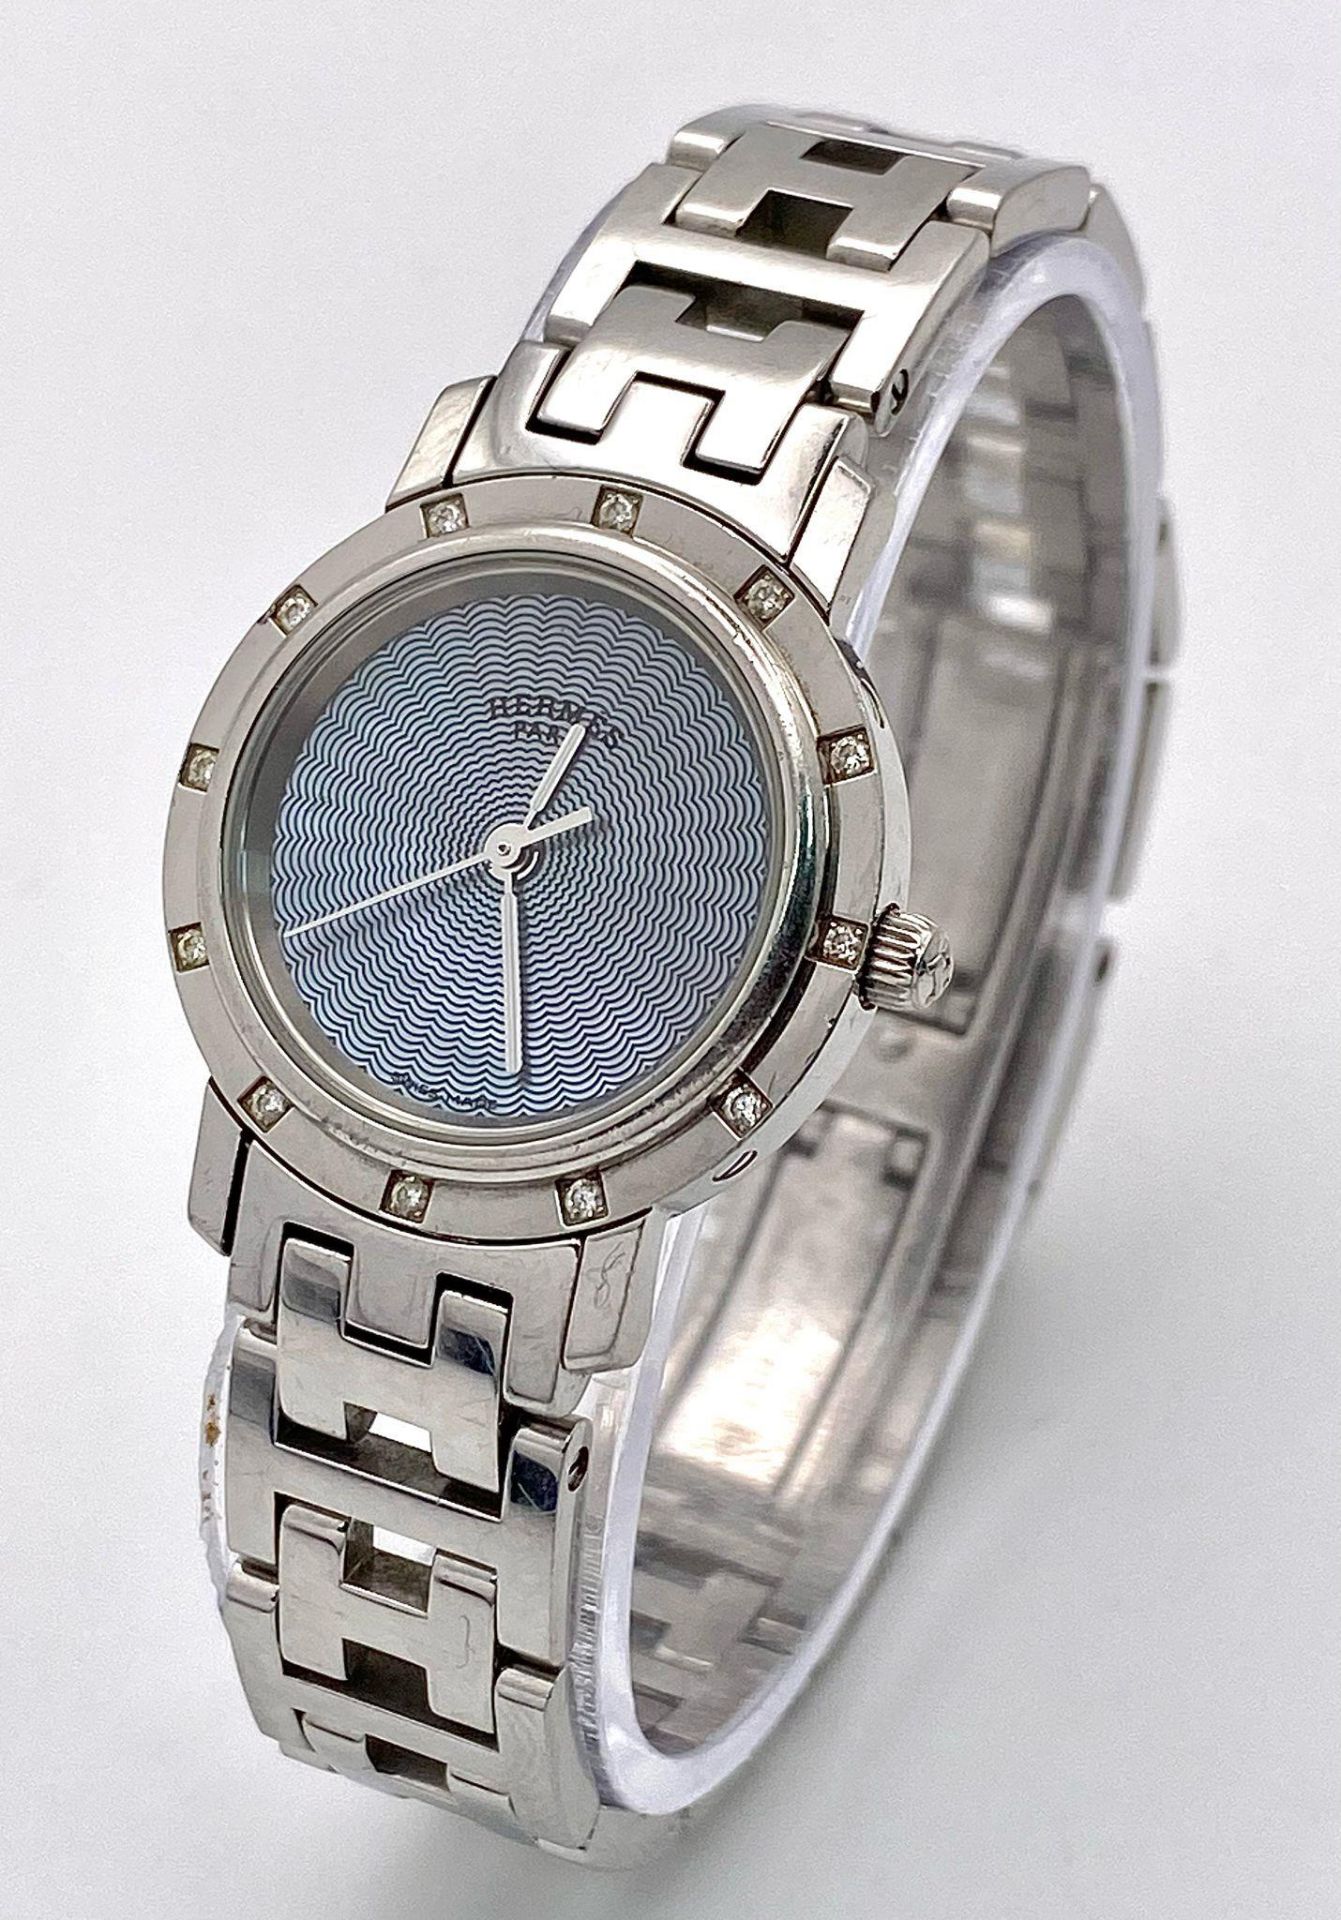 A "HERMES" STAINLESS STEEL LADIES QUARTZ WATCH WITH DIAMOND OUTER BEZEL. 24mm - Image 3 of 8